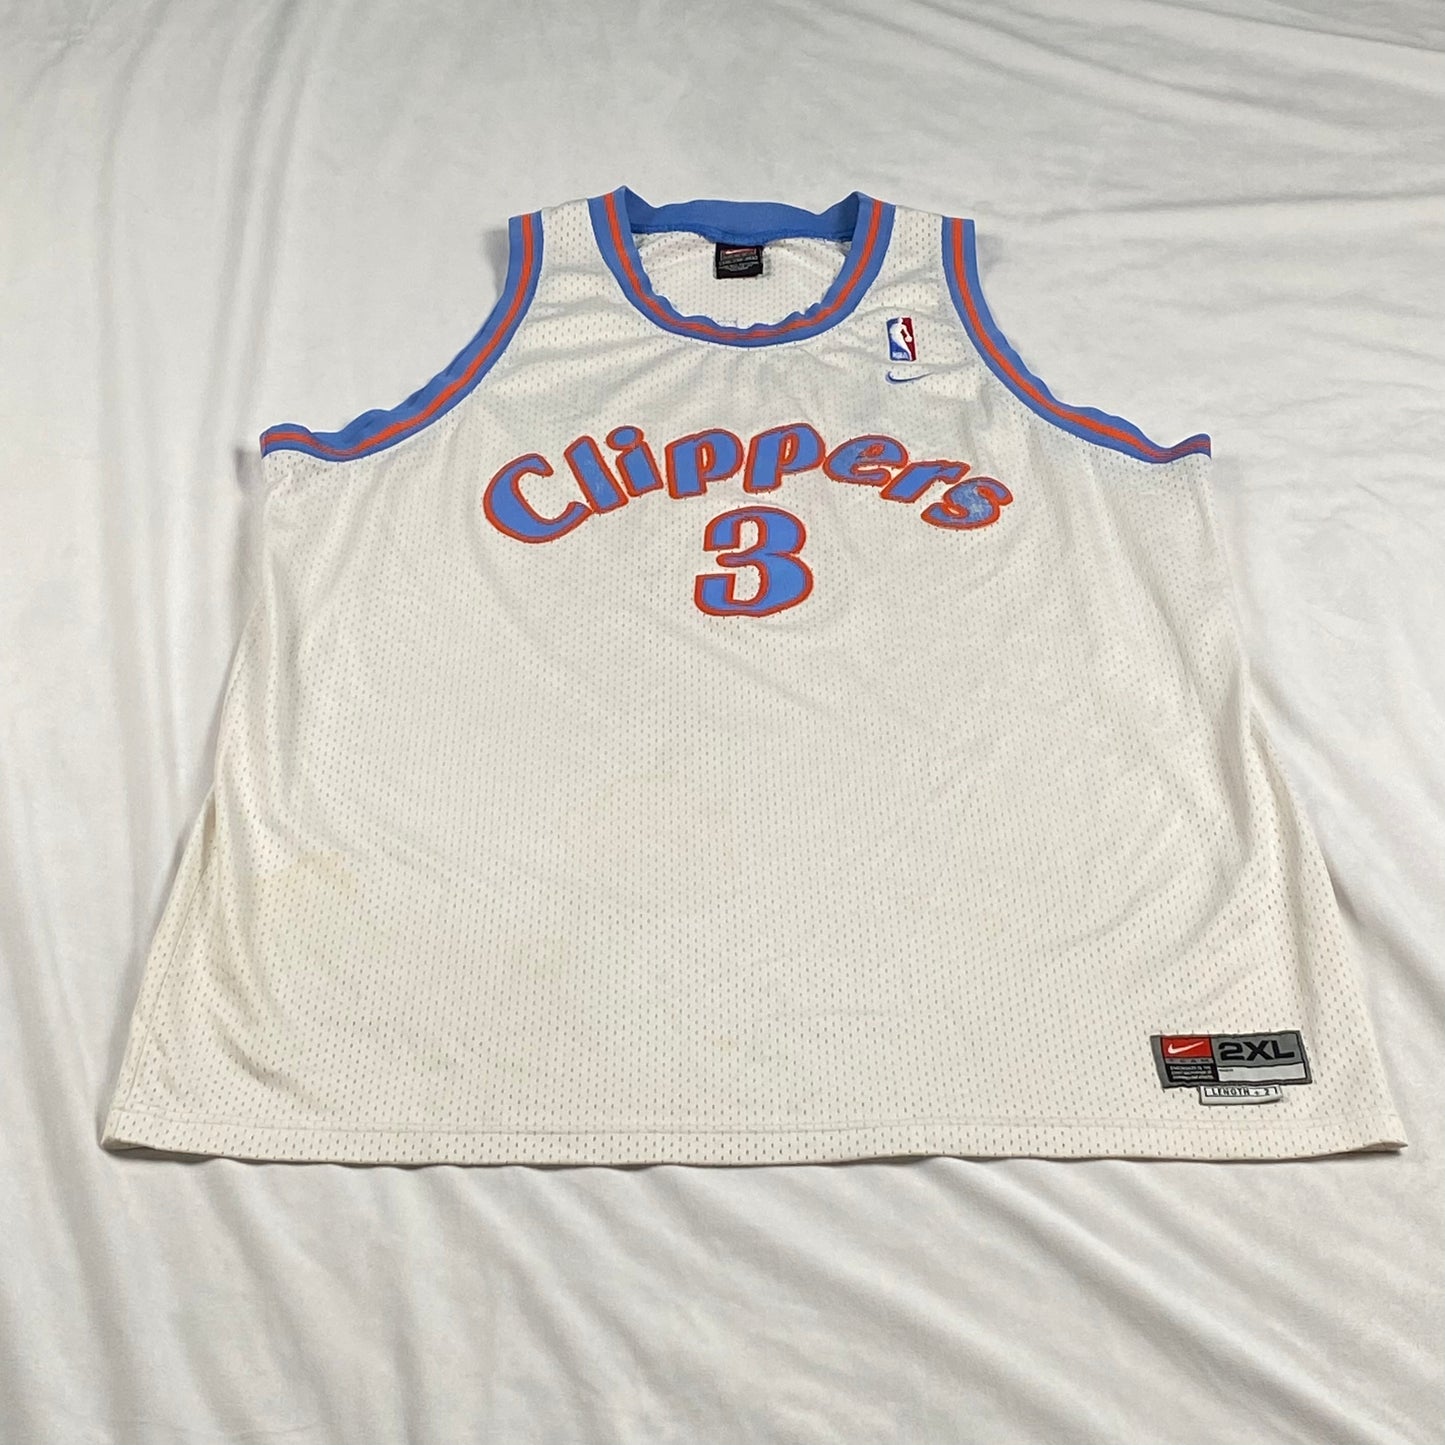 Los Angeles Clippers Quentin Richardson Nike Swingman NBA Basketball Jersey